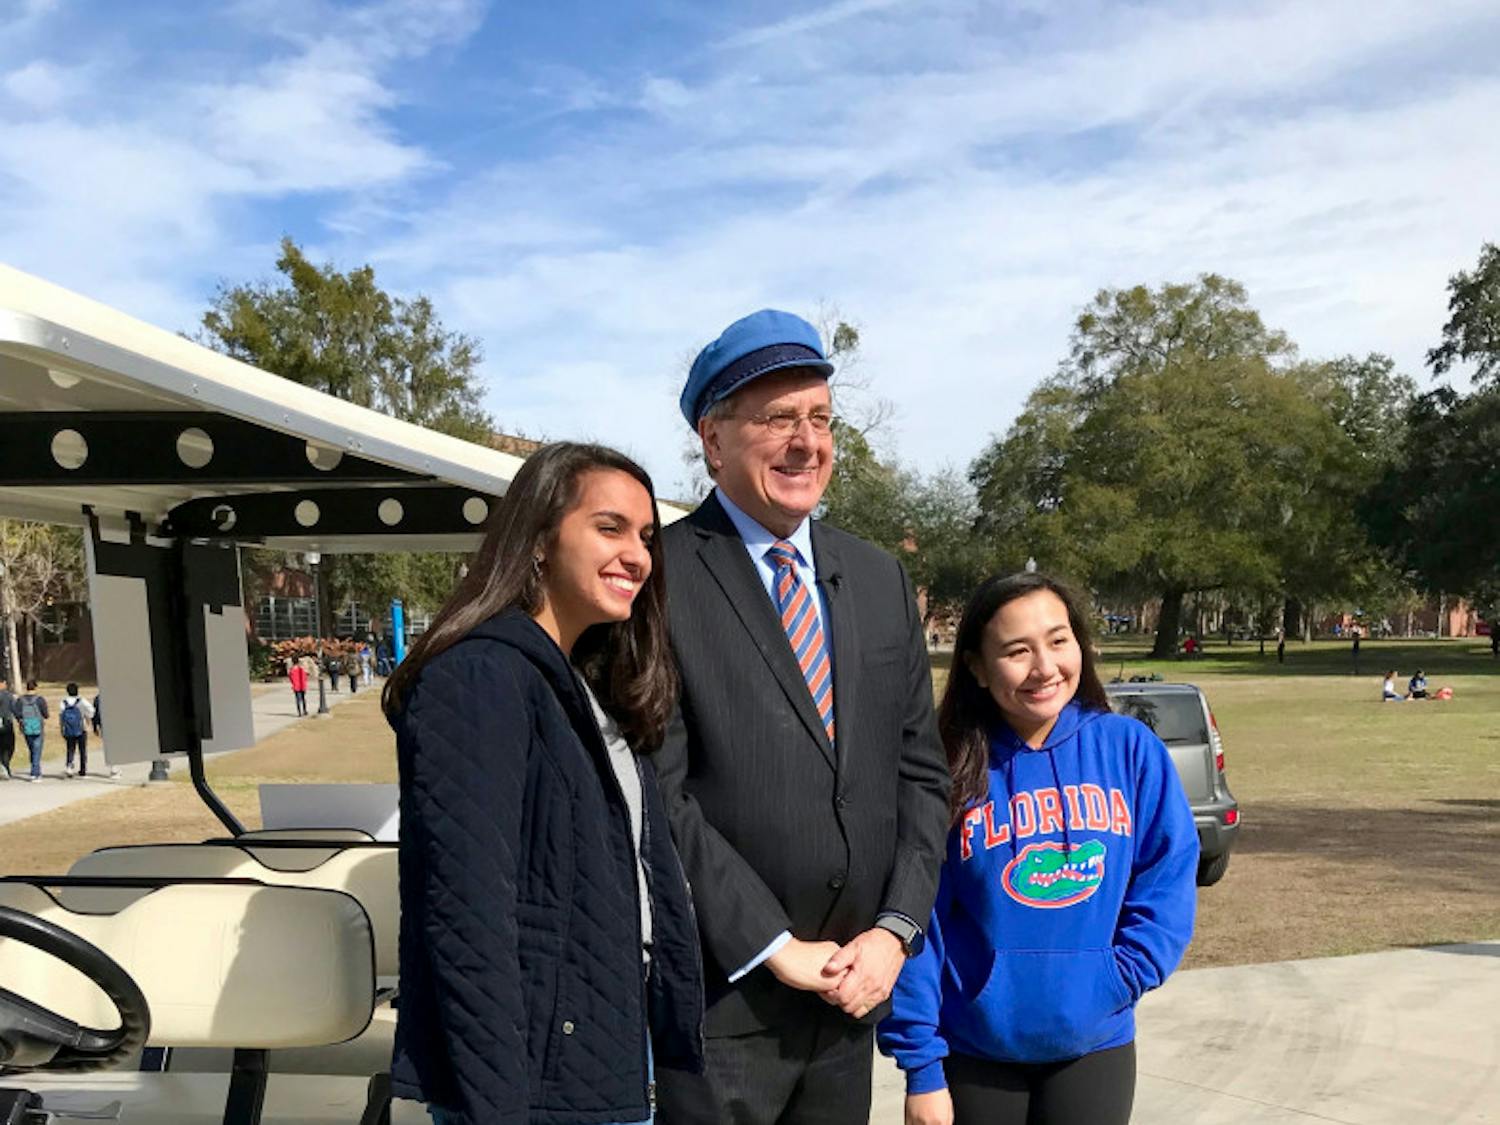 UF President Kent Fuchs poses with students in front of his Gator-themed golf cart. He drove students back and forth between campus locations on the first day of classes. 